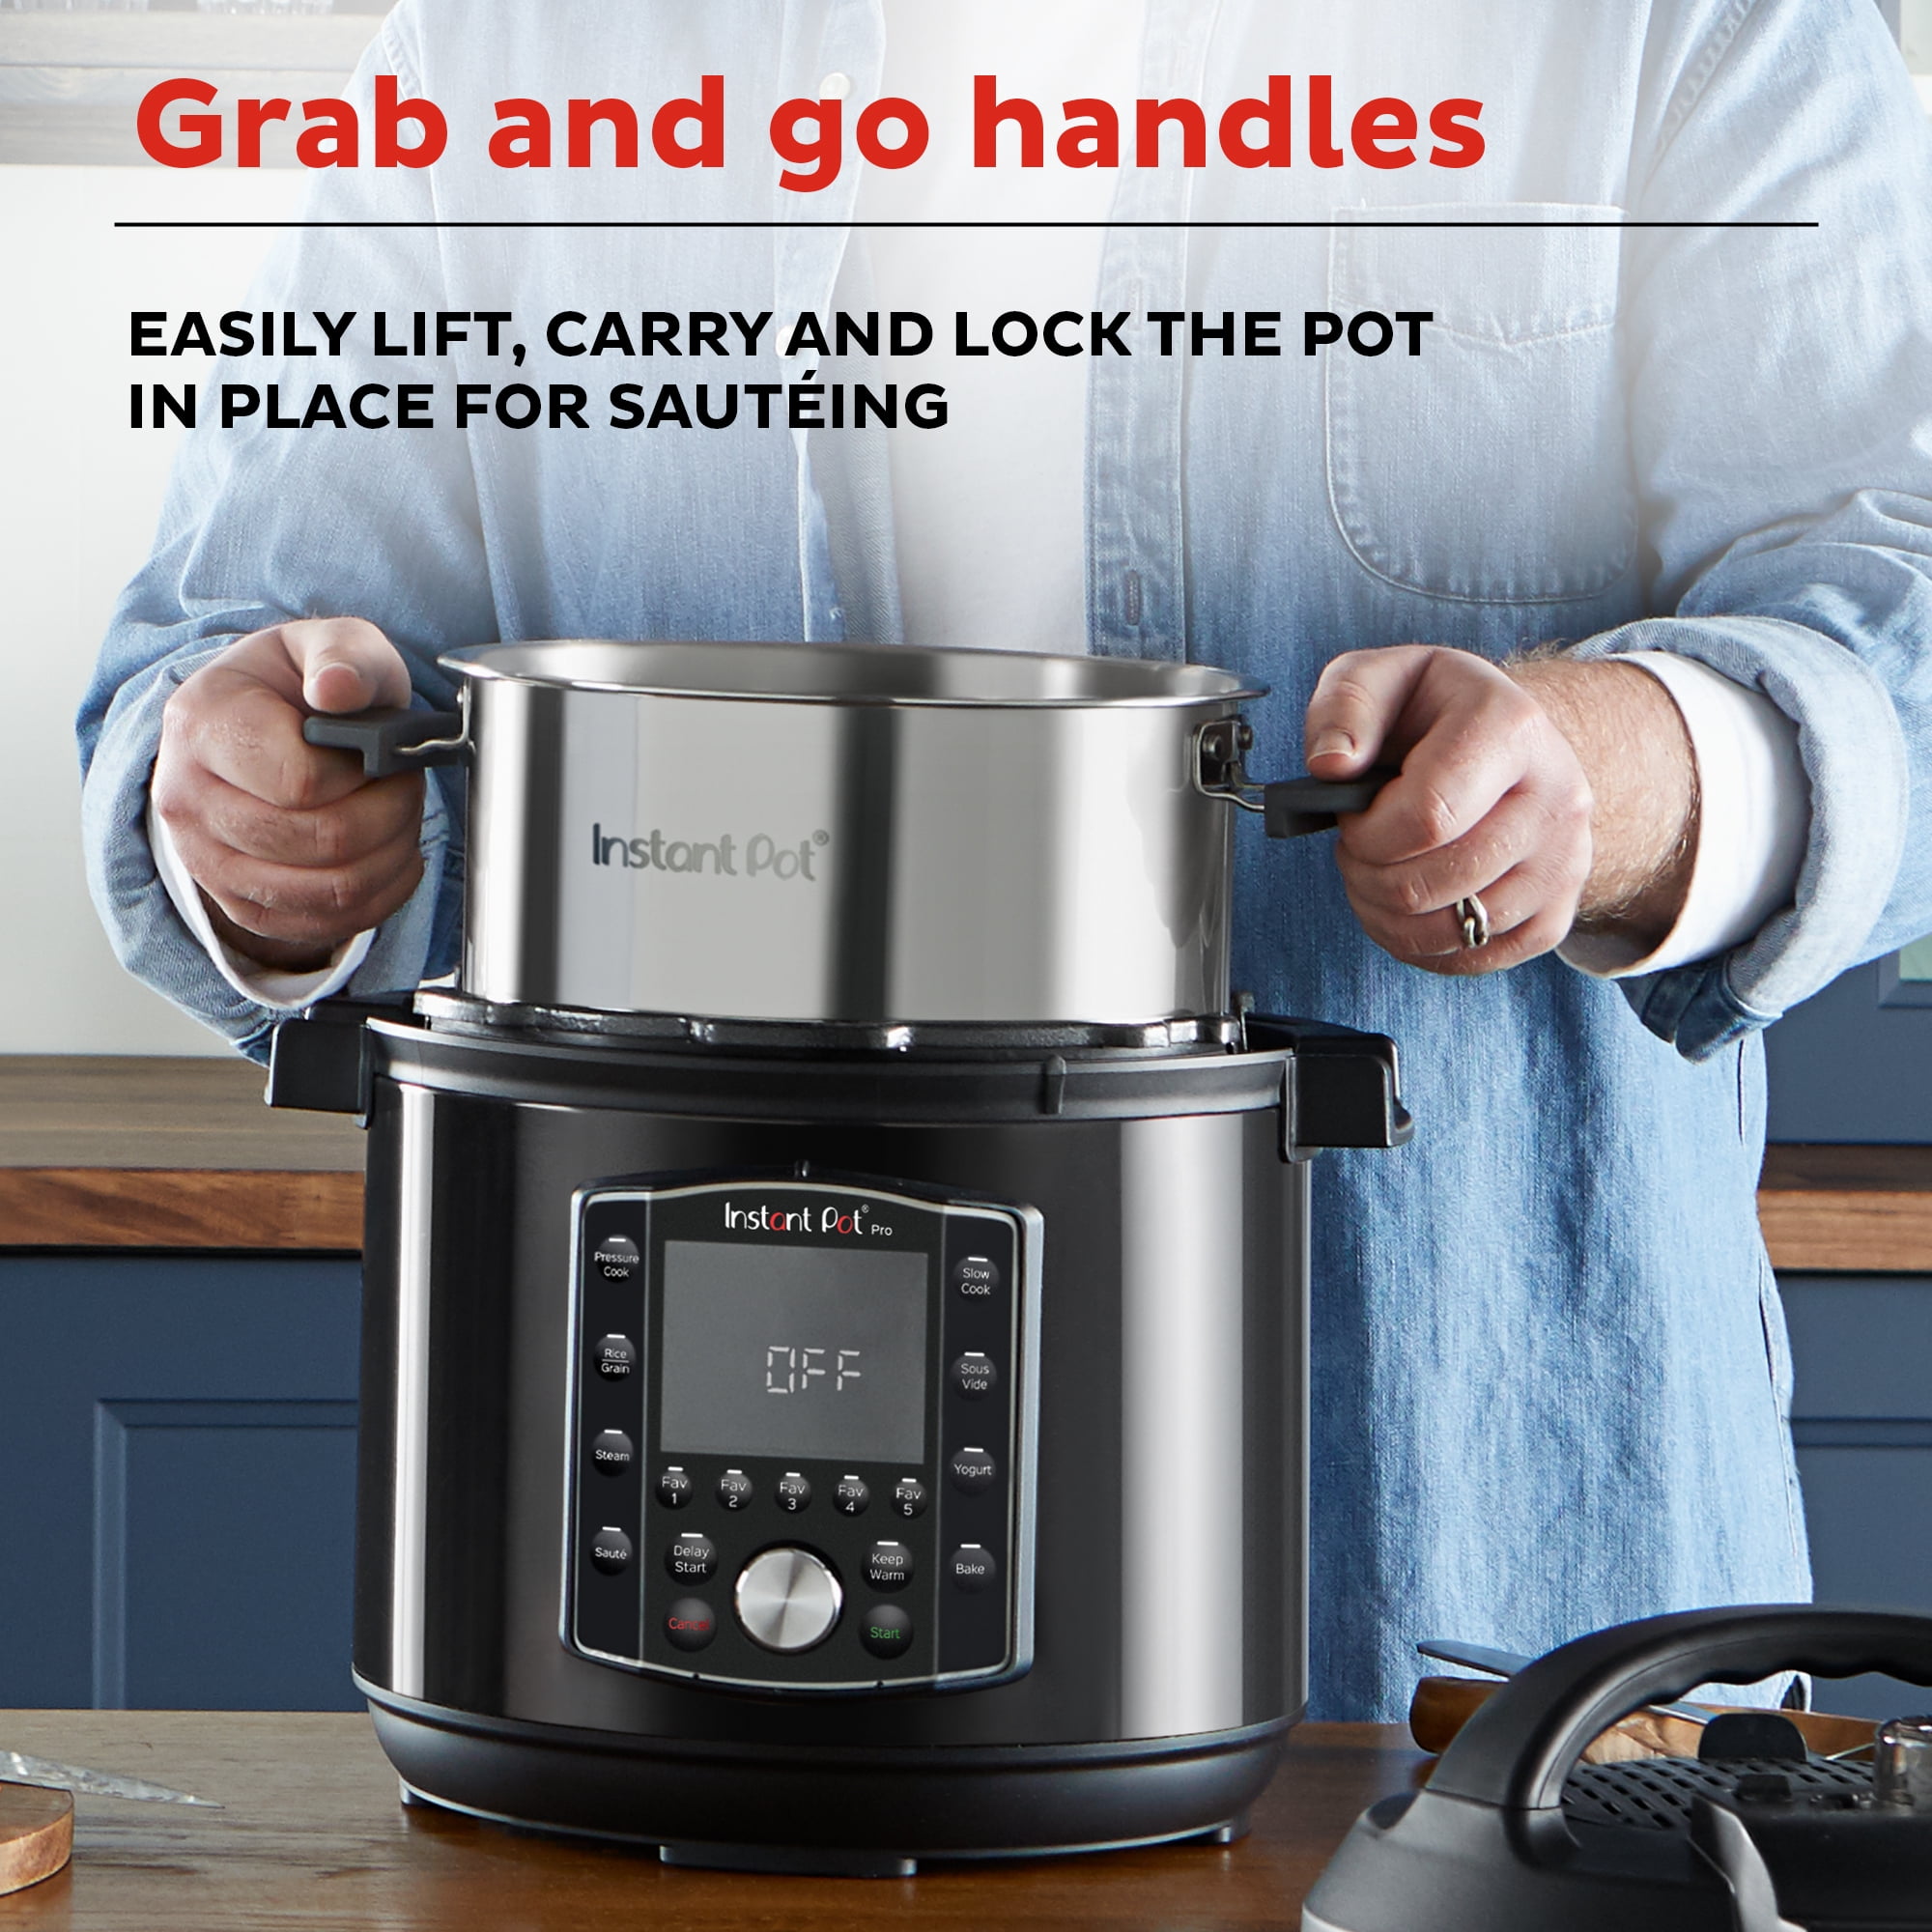 0.8-2L Portable Pressure Cooker: Cook Anywhere!